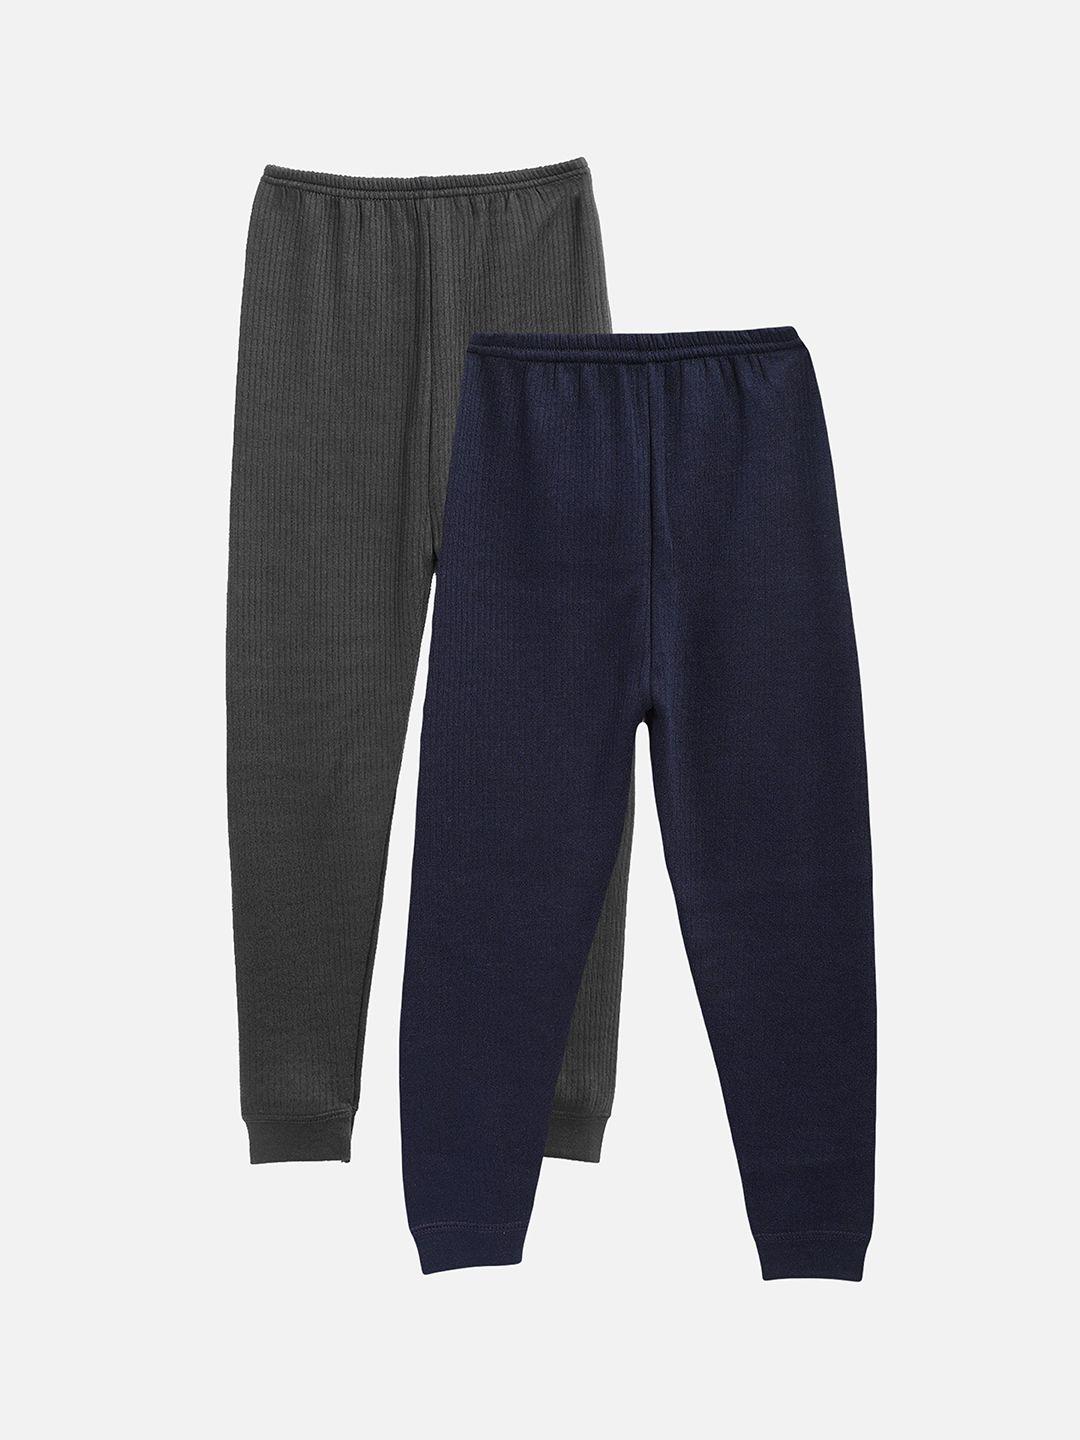 kanvin boys pack of 2 charcoal & navy blue thermal bottoms